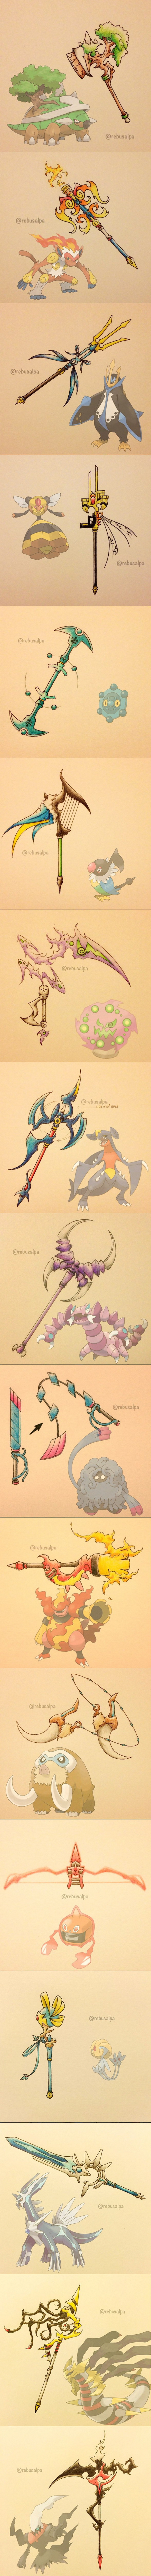 pokeweapons5.png : 포켓몬 웨폰